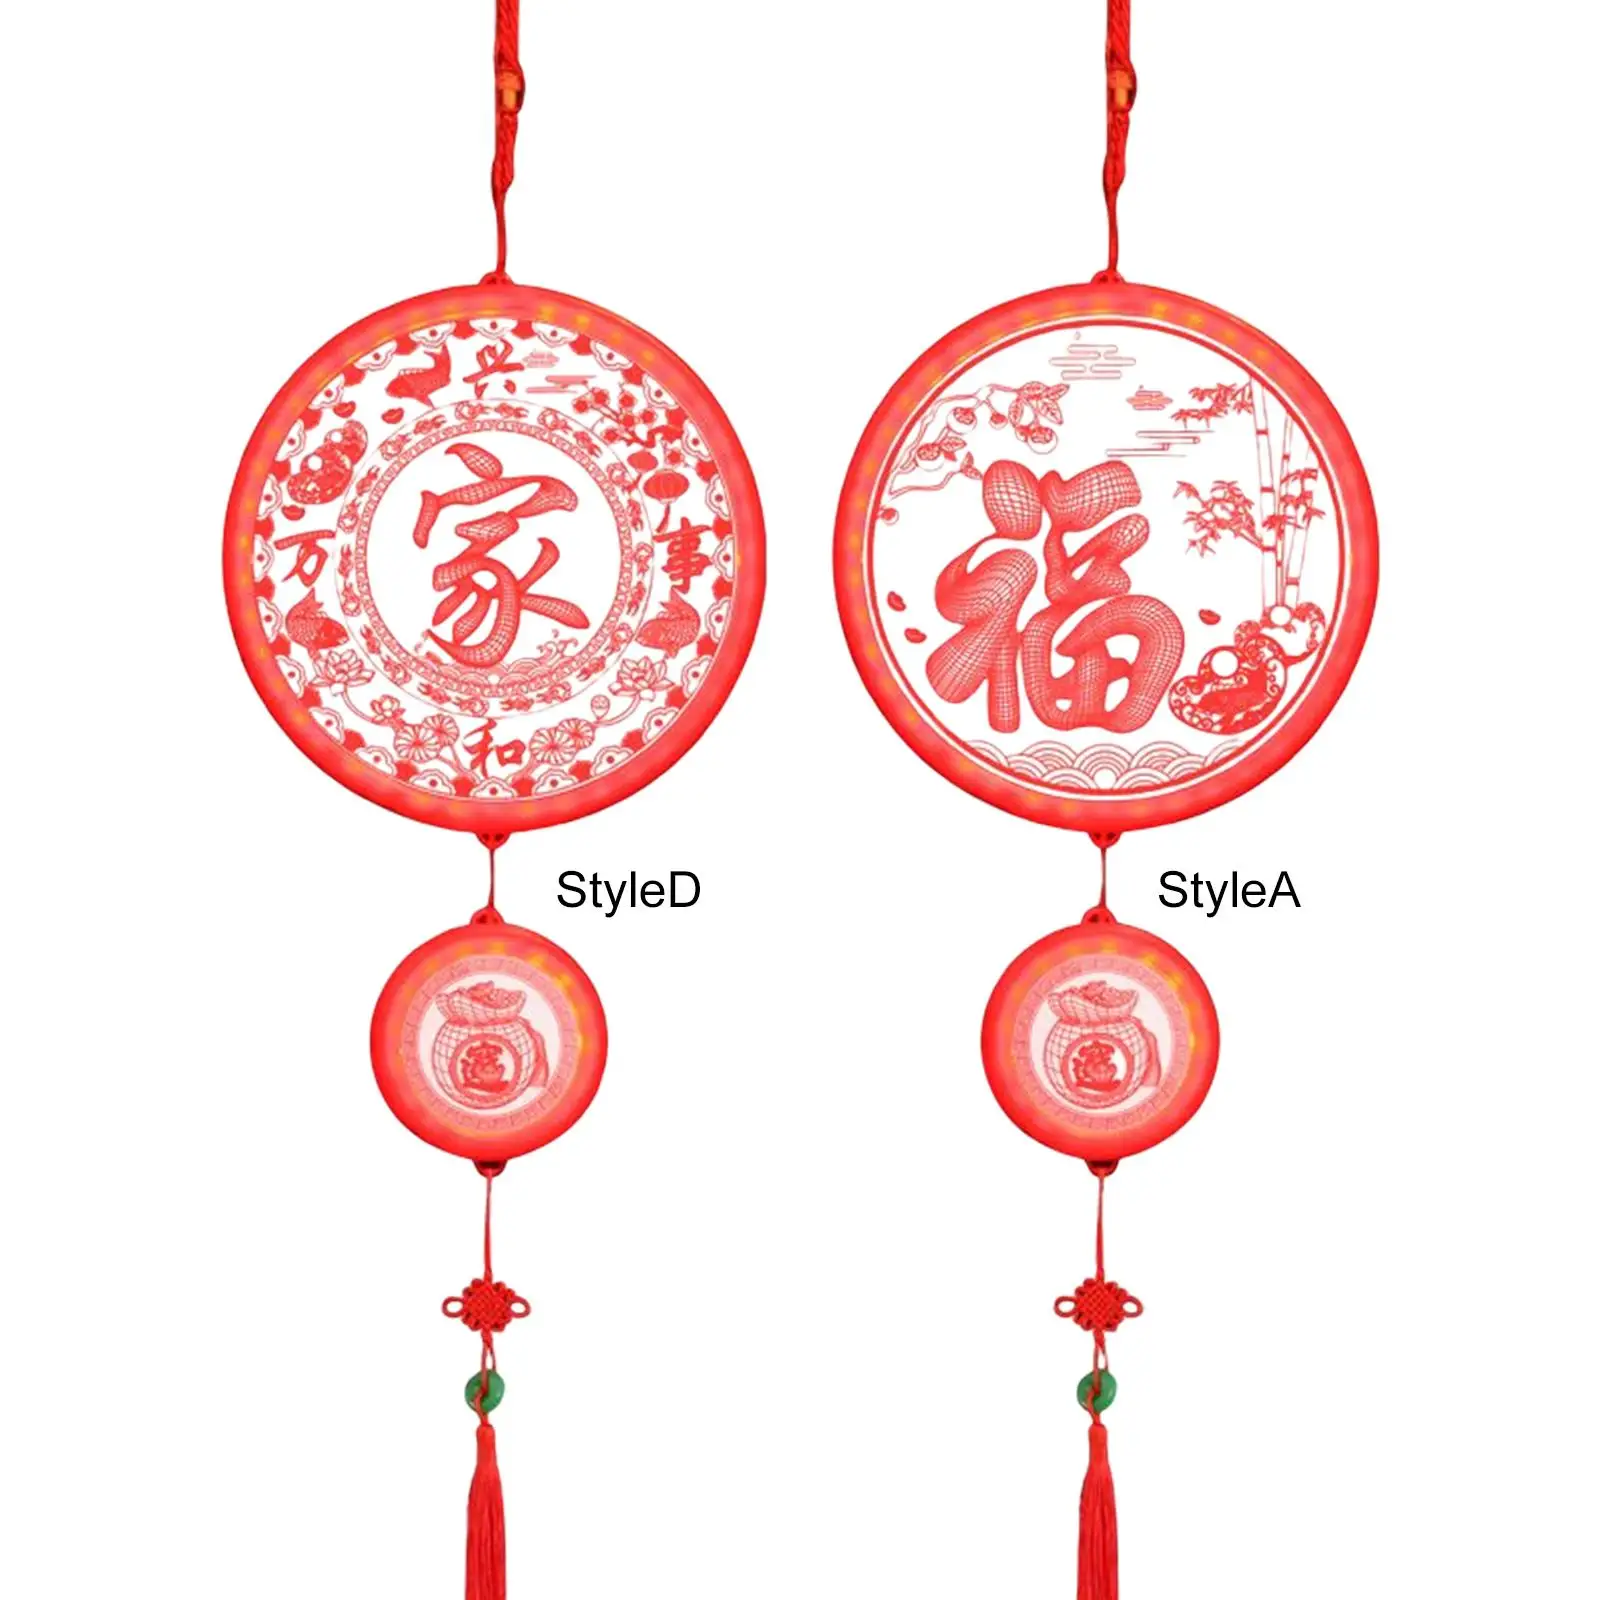 Decorative Spring Festival Light New Year Decorations 3D Hanging Ornament Pendant for Holiday Celebration Indoor Window Outdoor